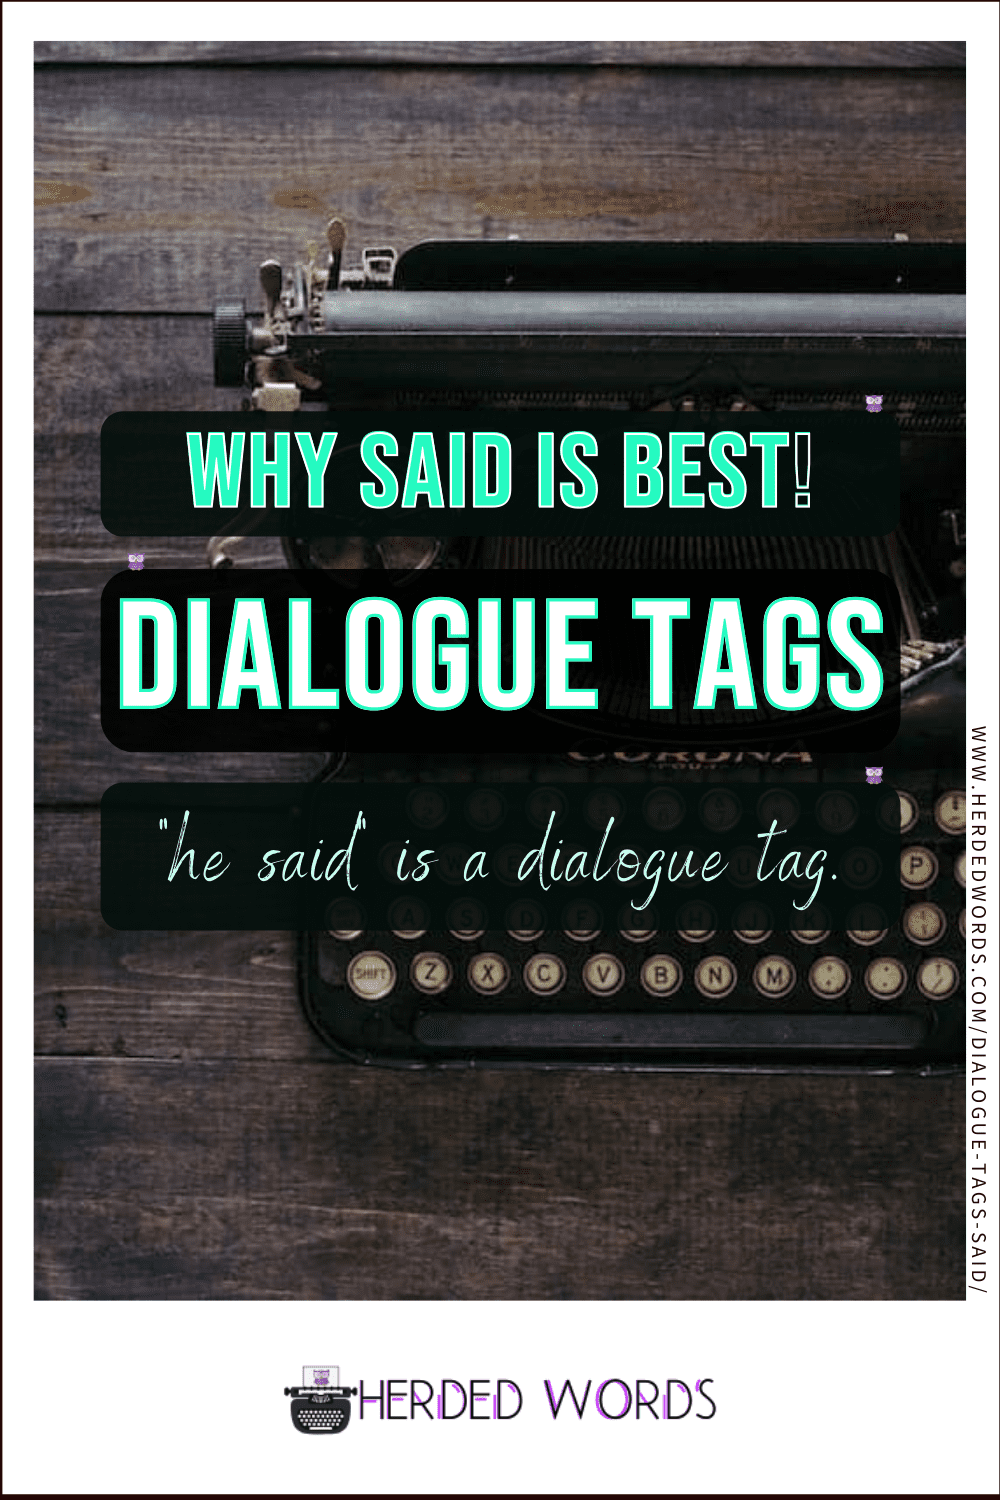 Image link to Dialogue Tags (why said is best)